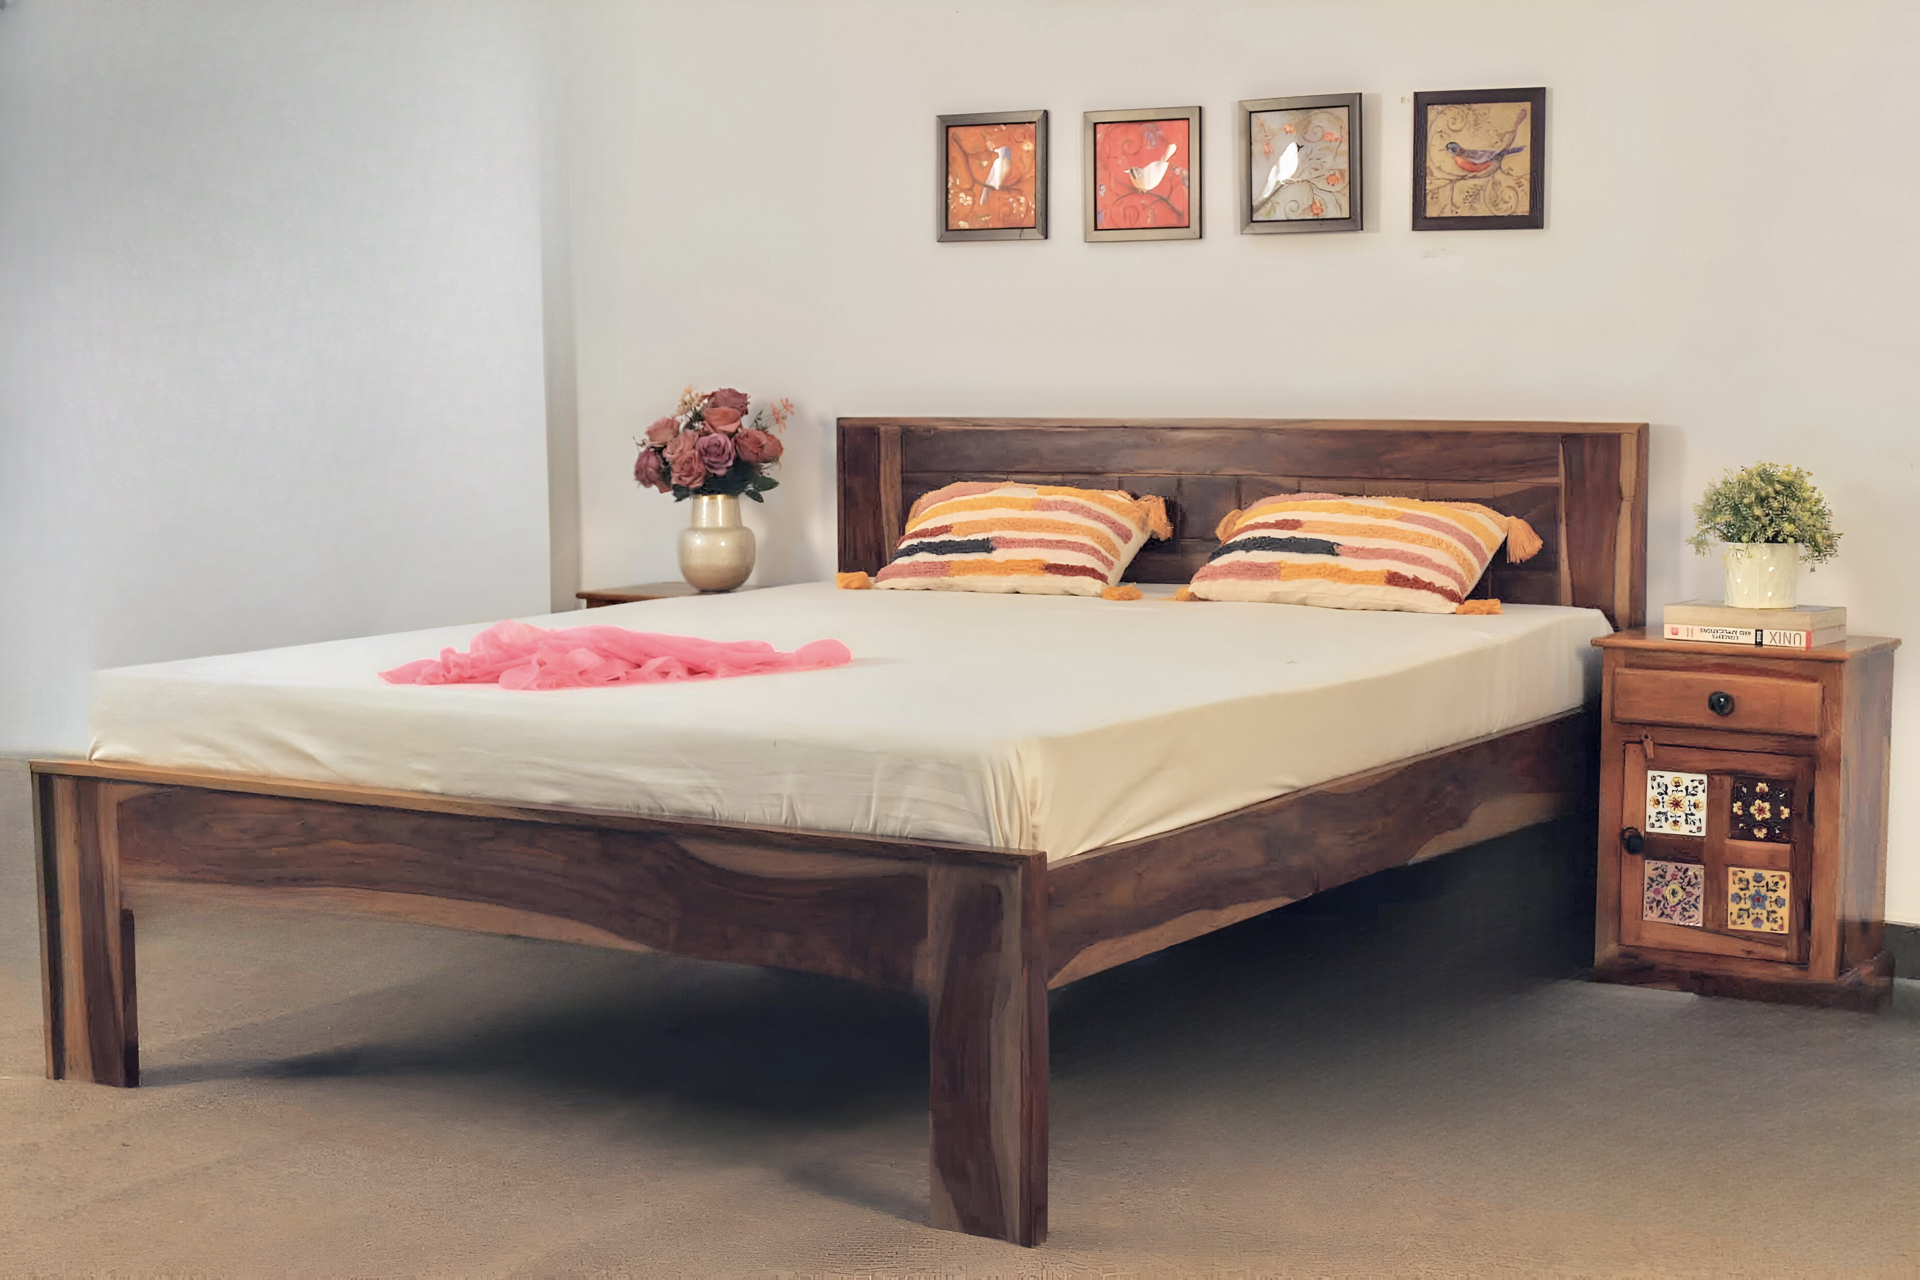 Elevate your bedroom with our affordable Sheesham Wood Arrow Budget Wooden Bed in Bangalore. Buy king and queen double beds for a perfect blend of elegance.